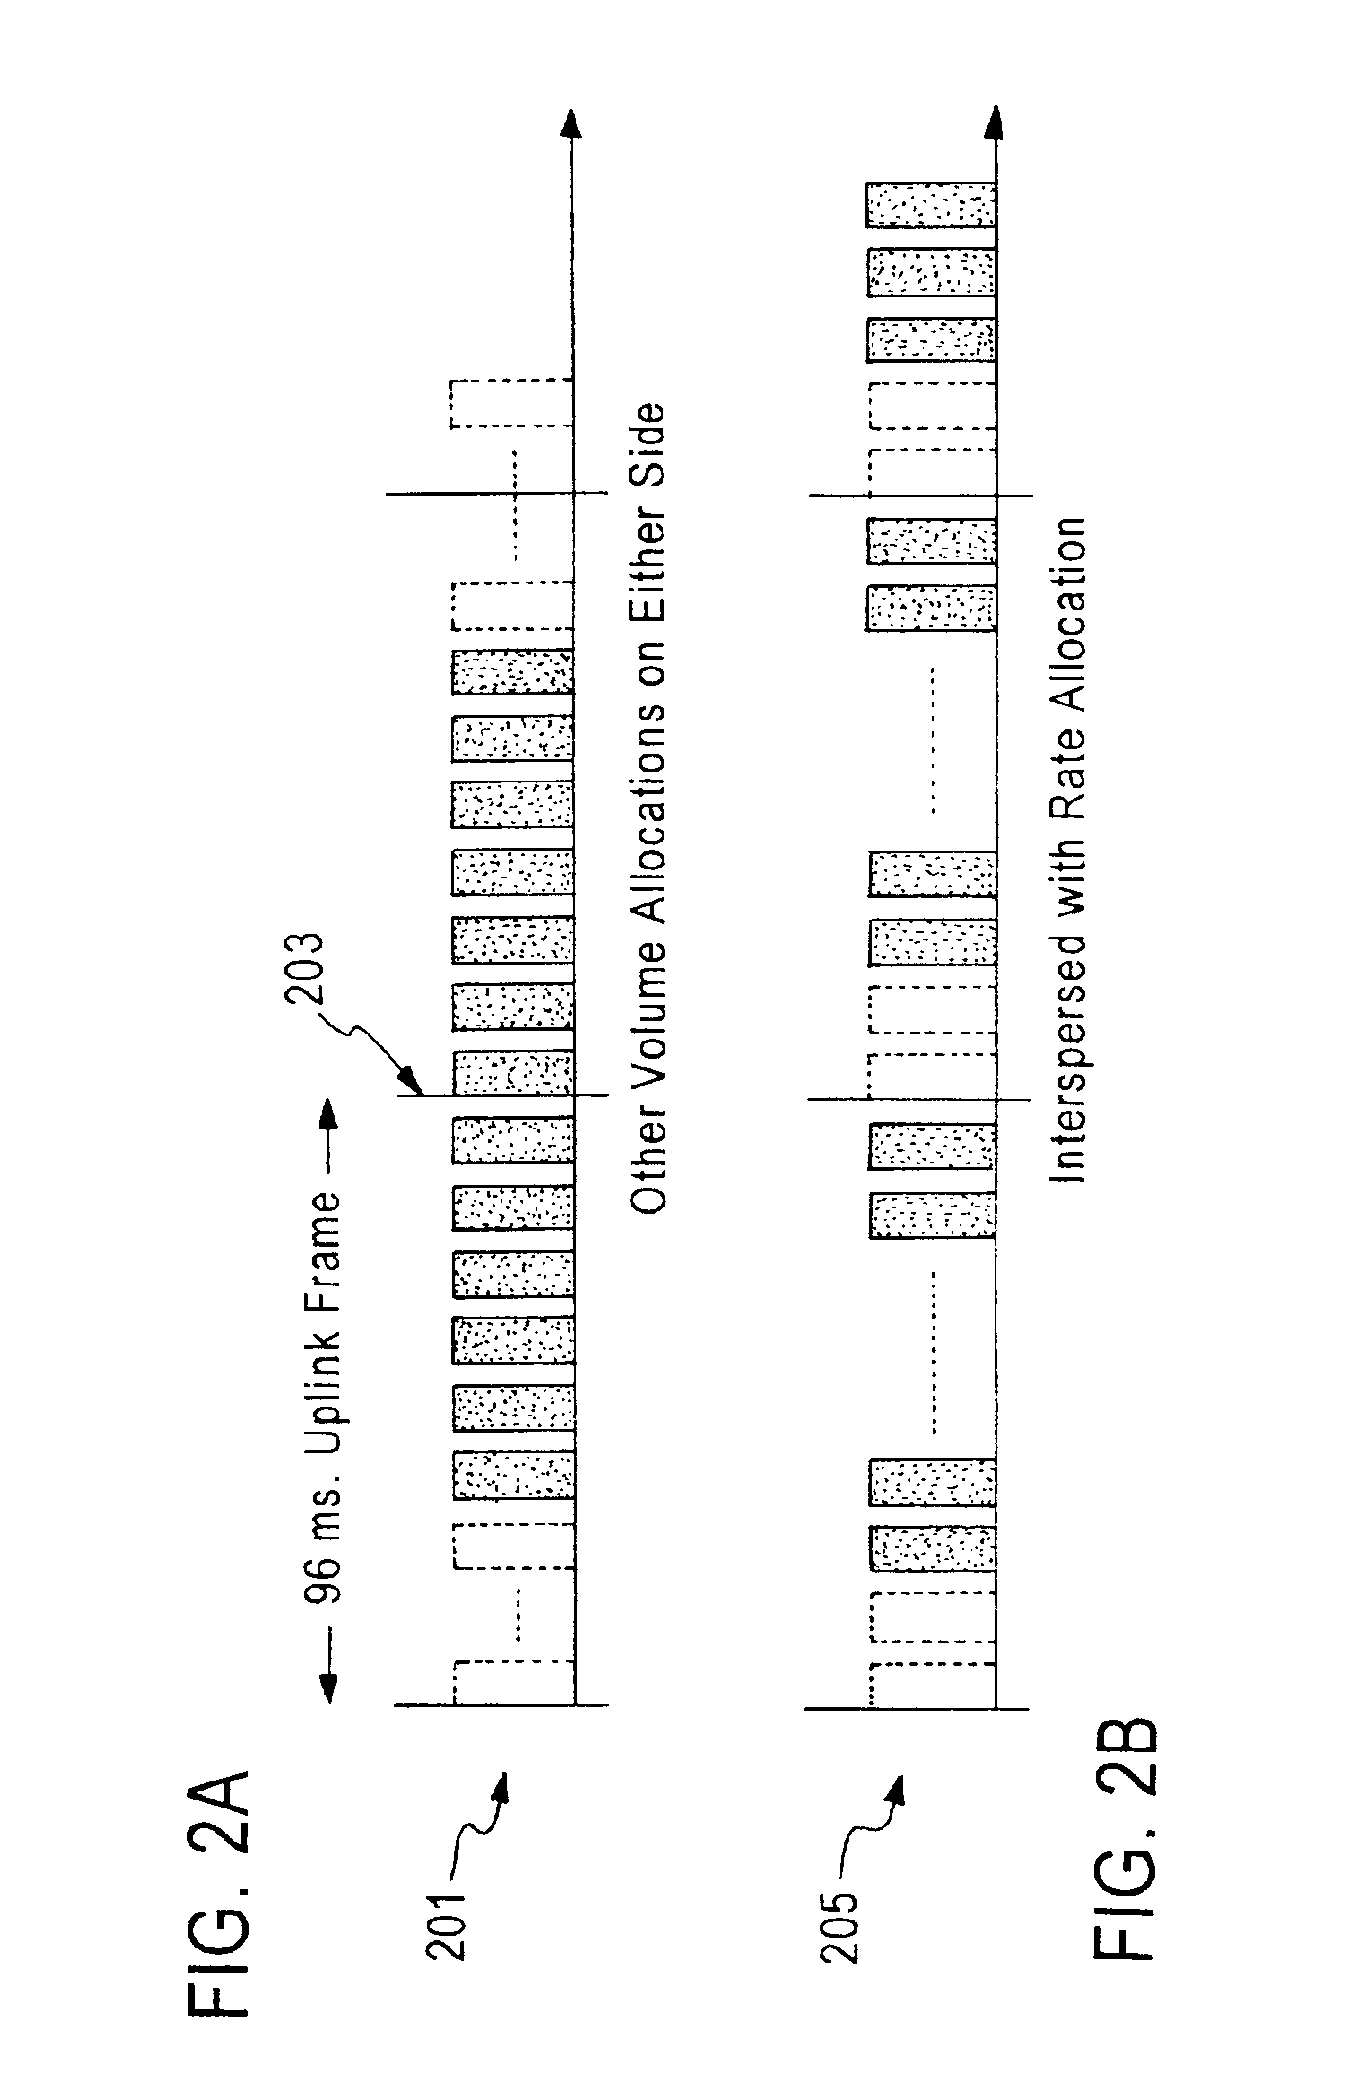 Low latency handling of transmission control protocol messages in a broadband satellite communications system